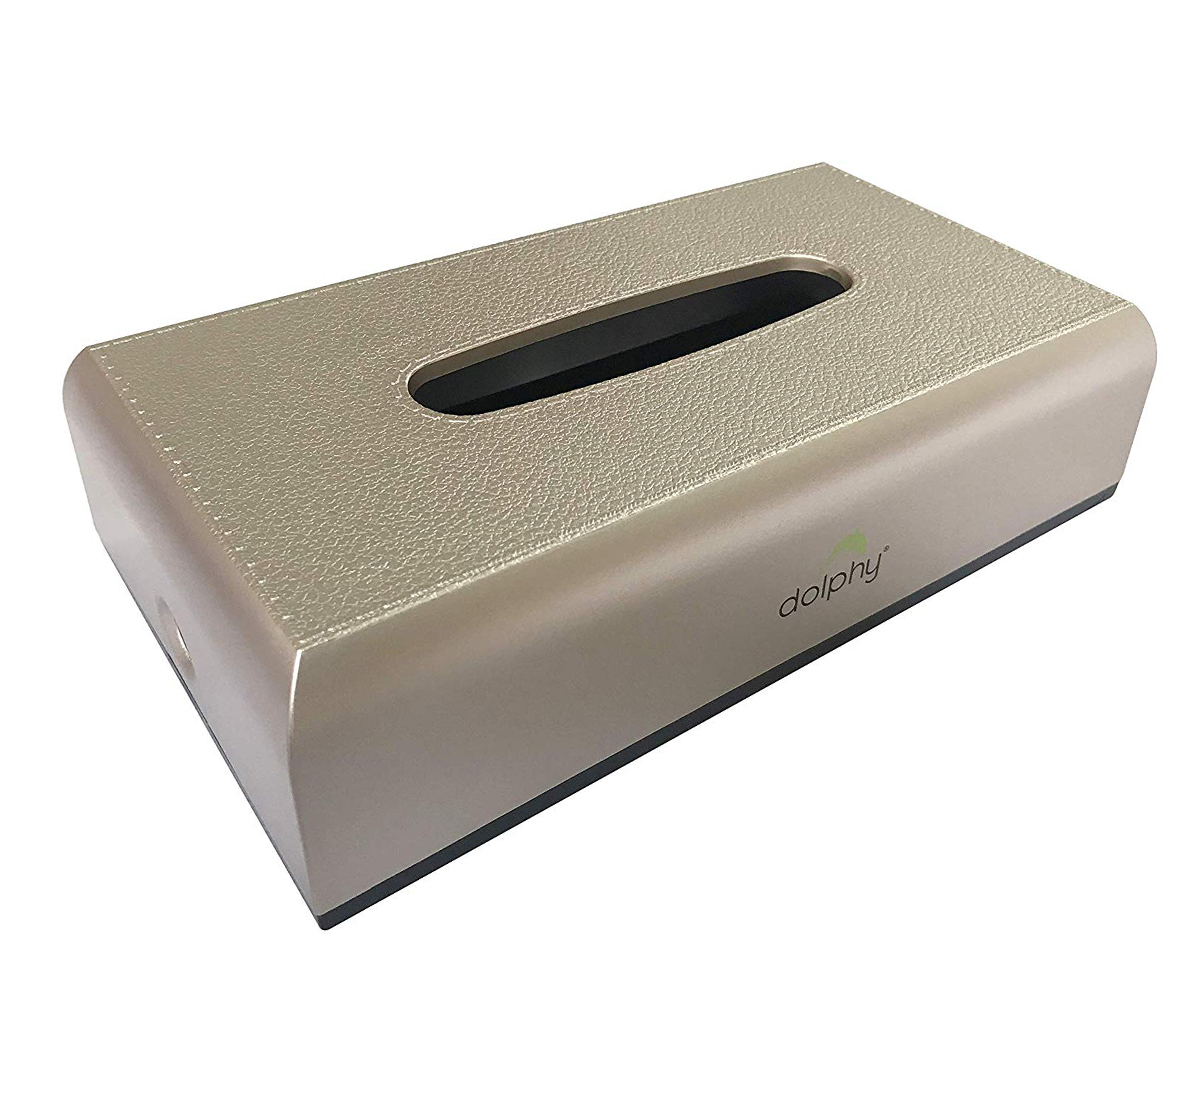 Golden Manual Paper Dispenser With ABS Material